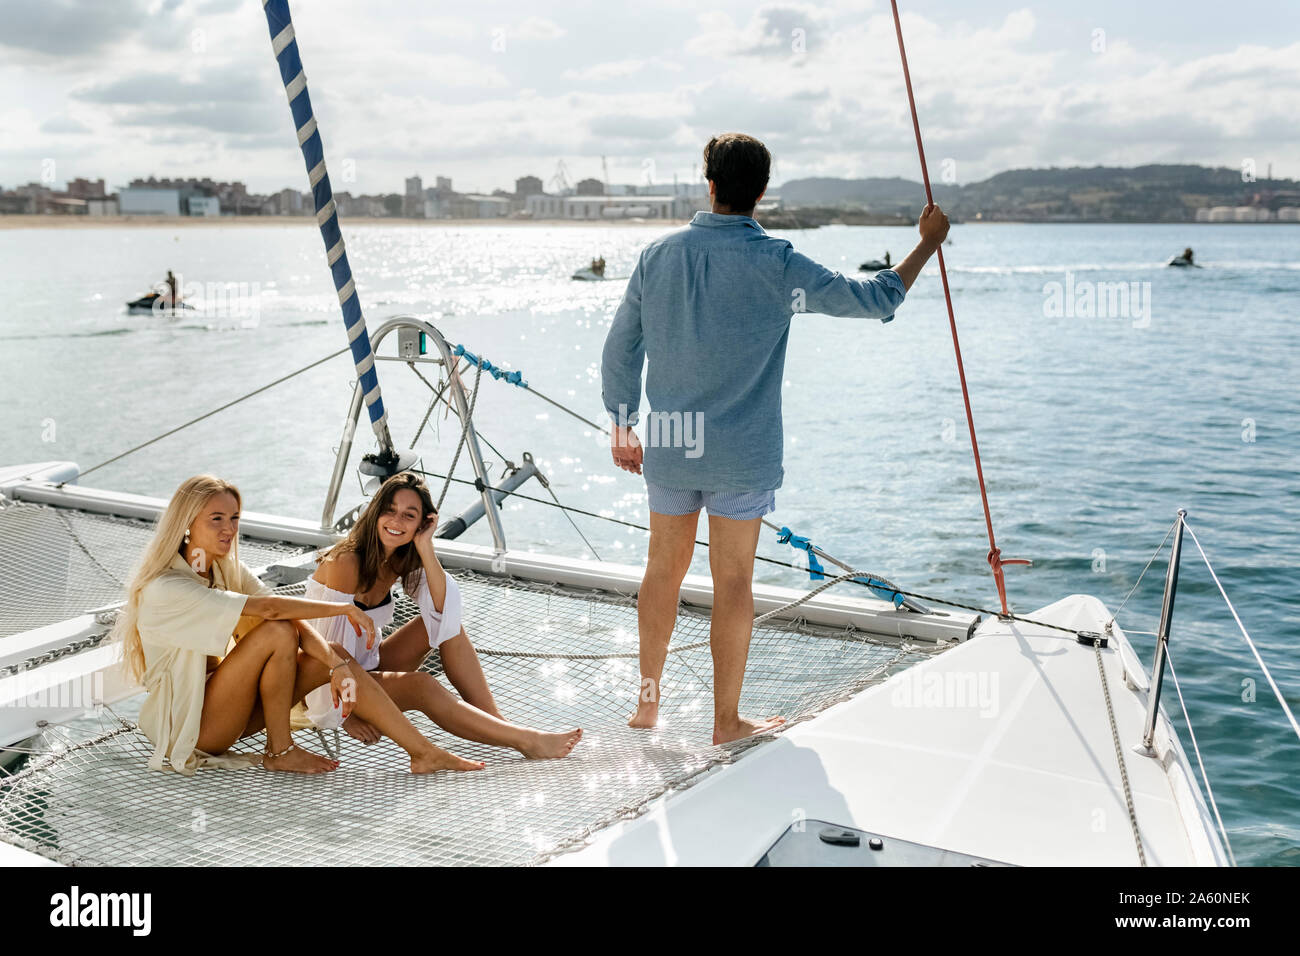 Three young friends enjoying a summer day on a sailboat Stock Photo